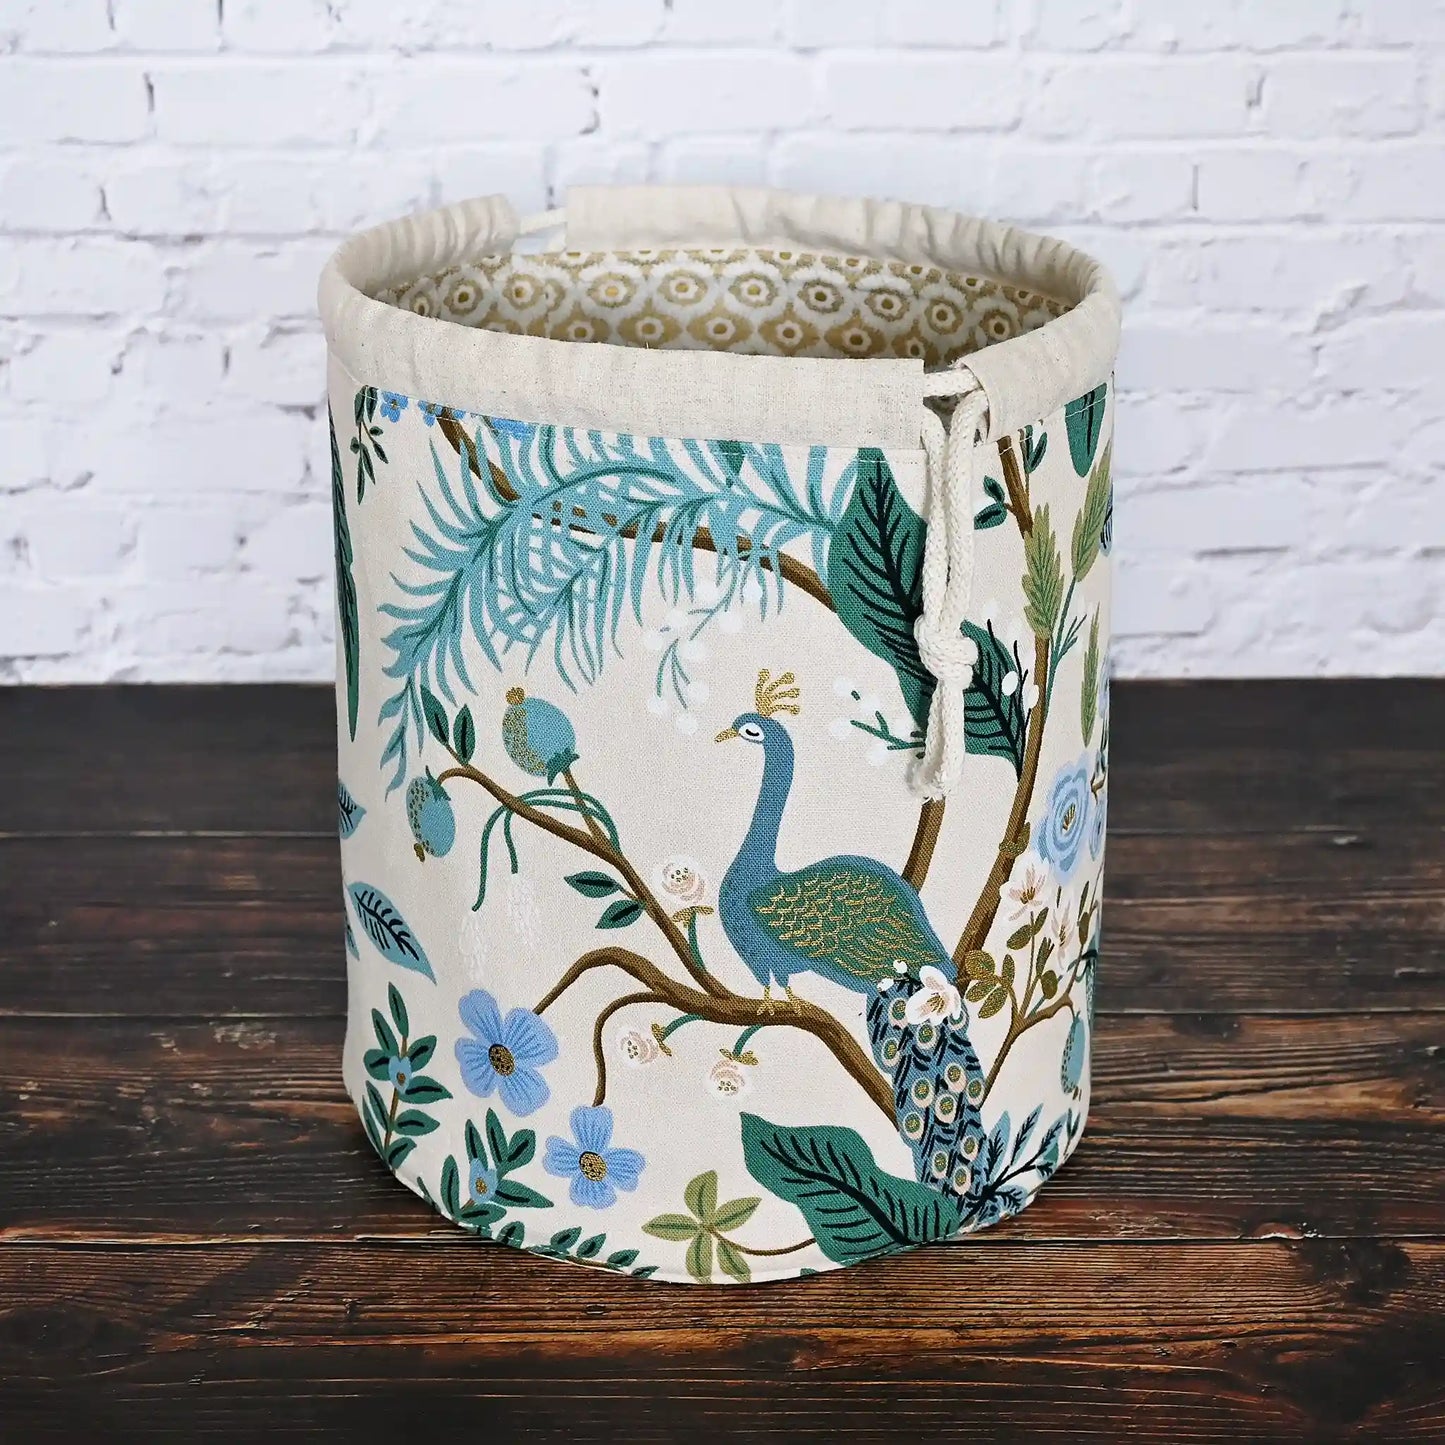 Beautiful canvas bucket bag in Rifle Paper Co's Antique Garden fabric, featuring green and teal florals and peacocks.  Made in Nova Scotia, Canada by Yellow Petal Handmade.